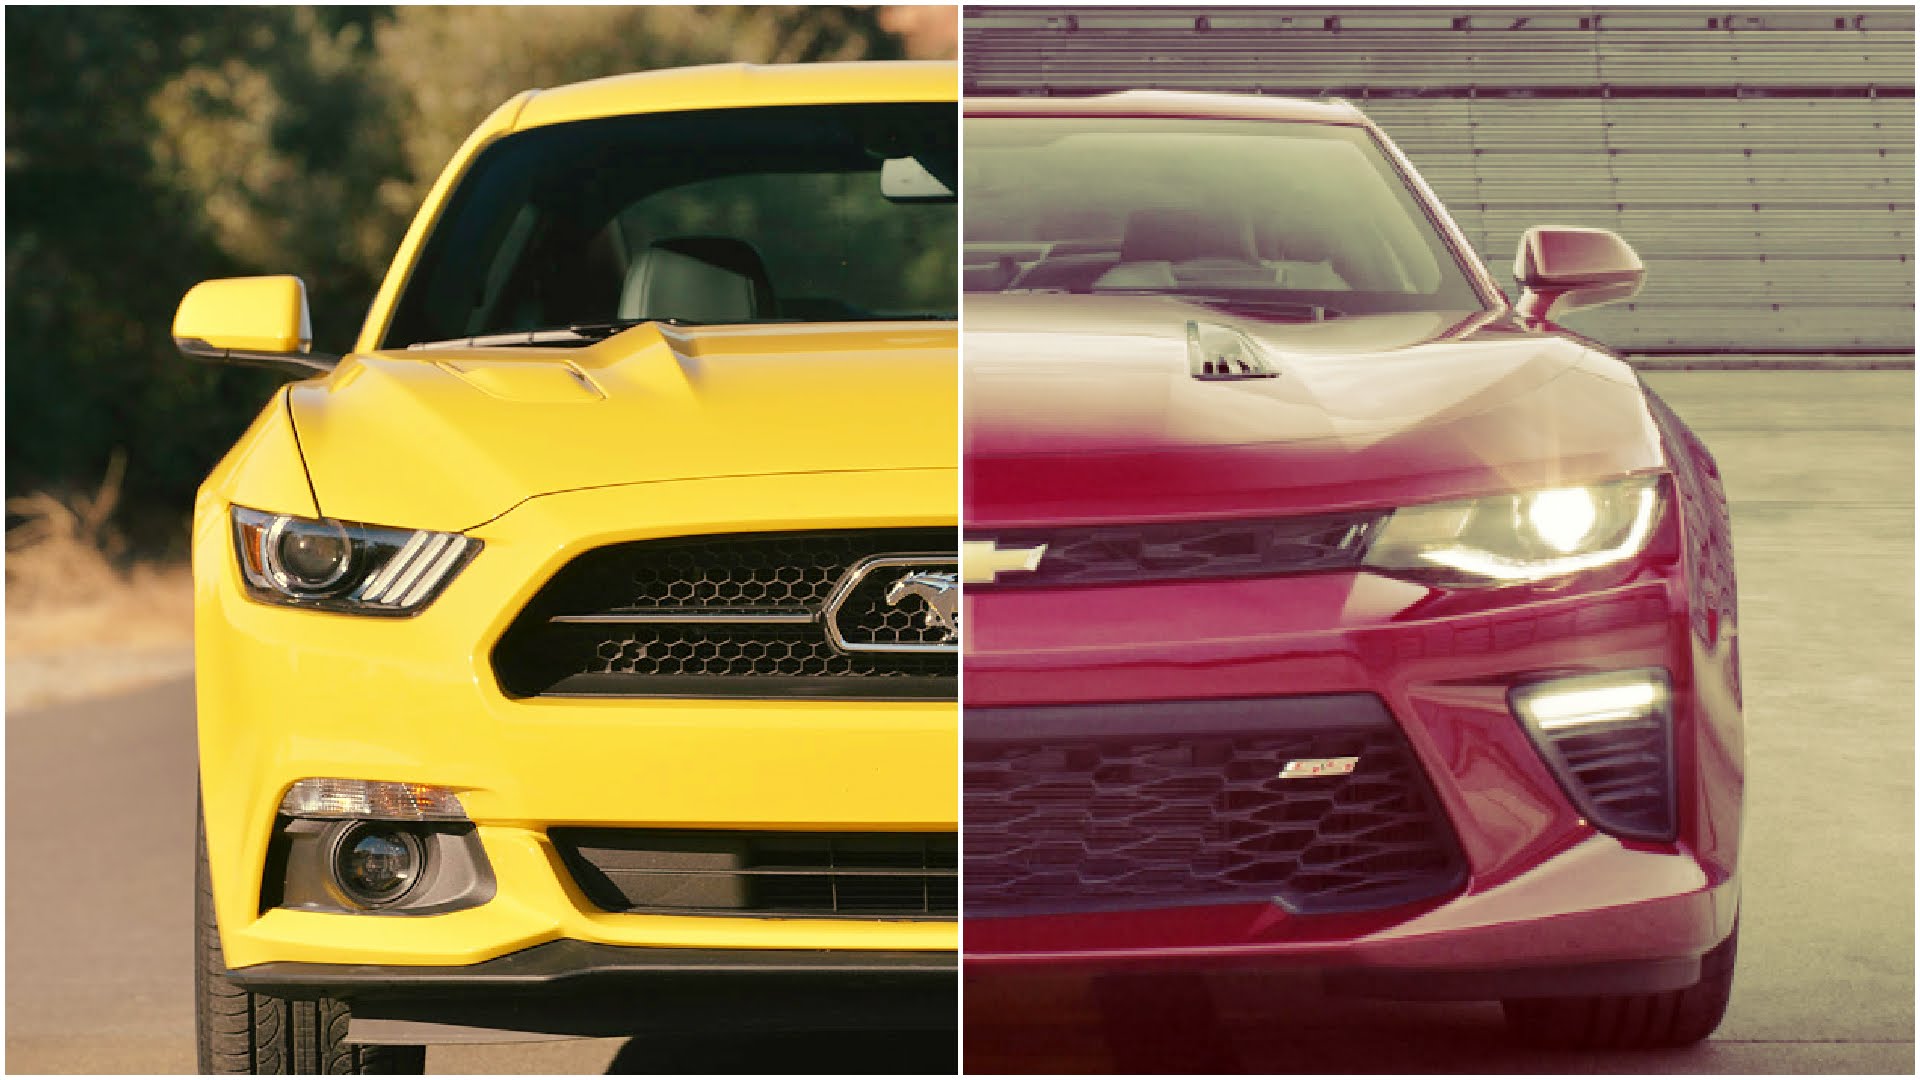 16 Chevy Camaro Vs 16 Ford Mustang Specs Comparison Release Date Specs And Prices